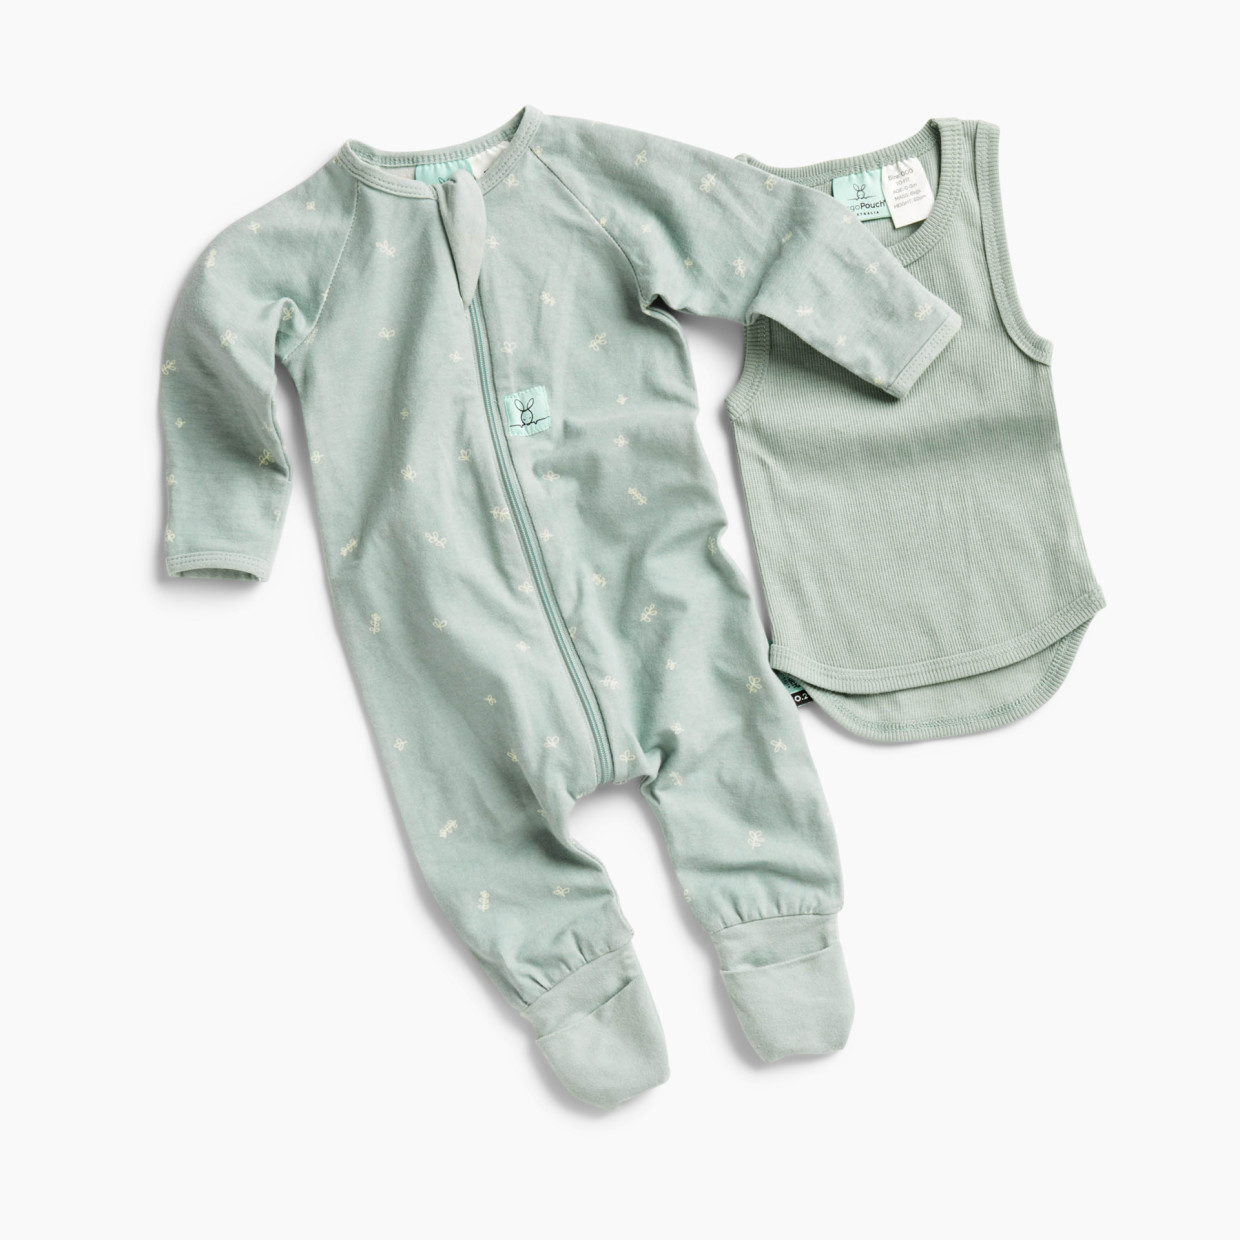 ergoPouch Gift Set 0.2 Tog Long Sleeve Layer and Long Sleeveless Tee - Sage.